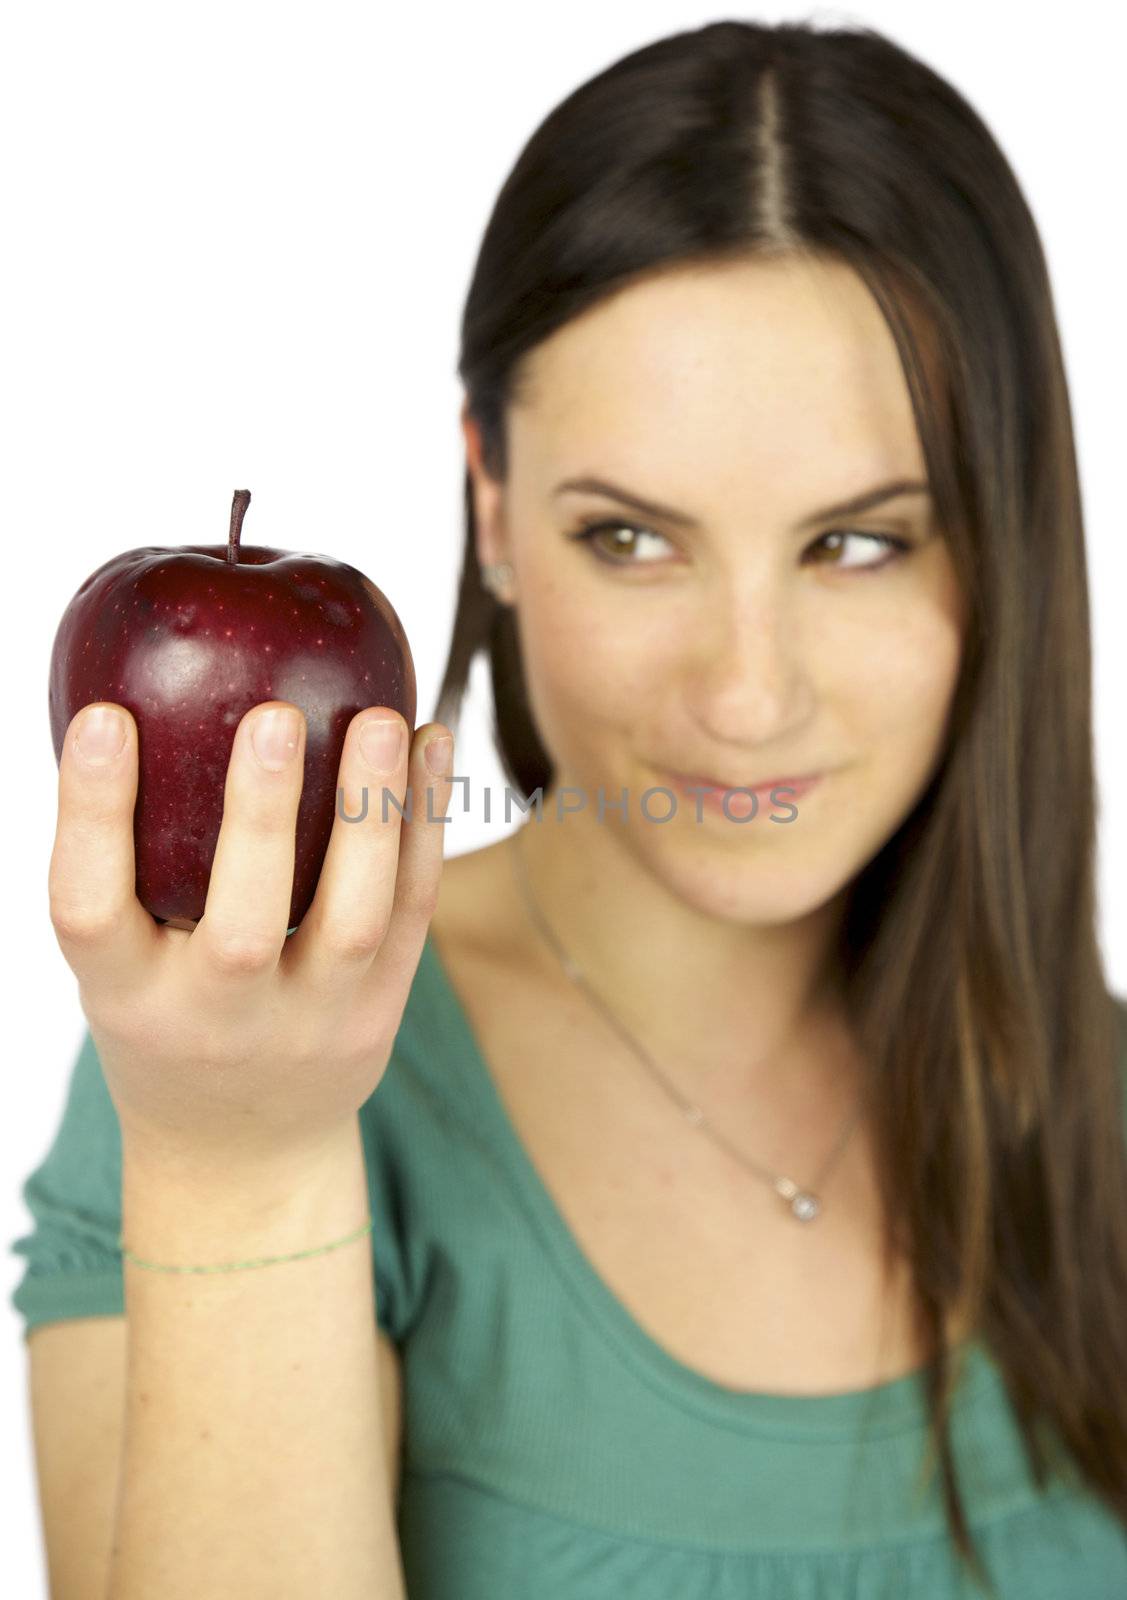 Focus on red big apple out of focus on girl hungry wanting to eat it